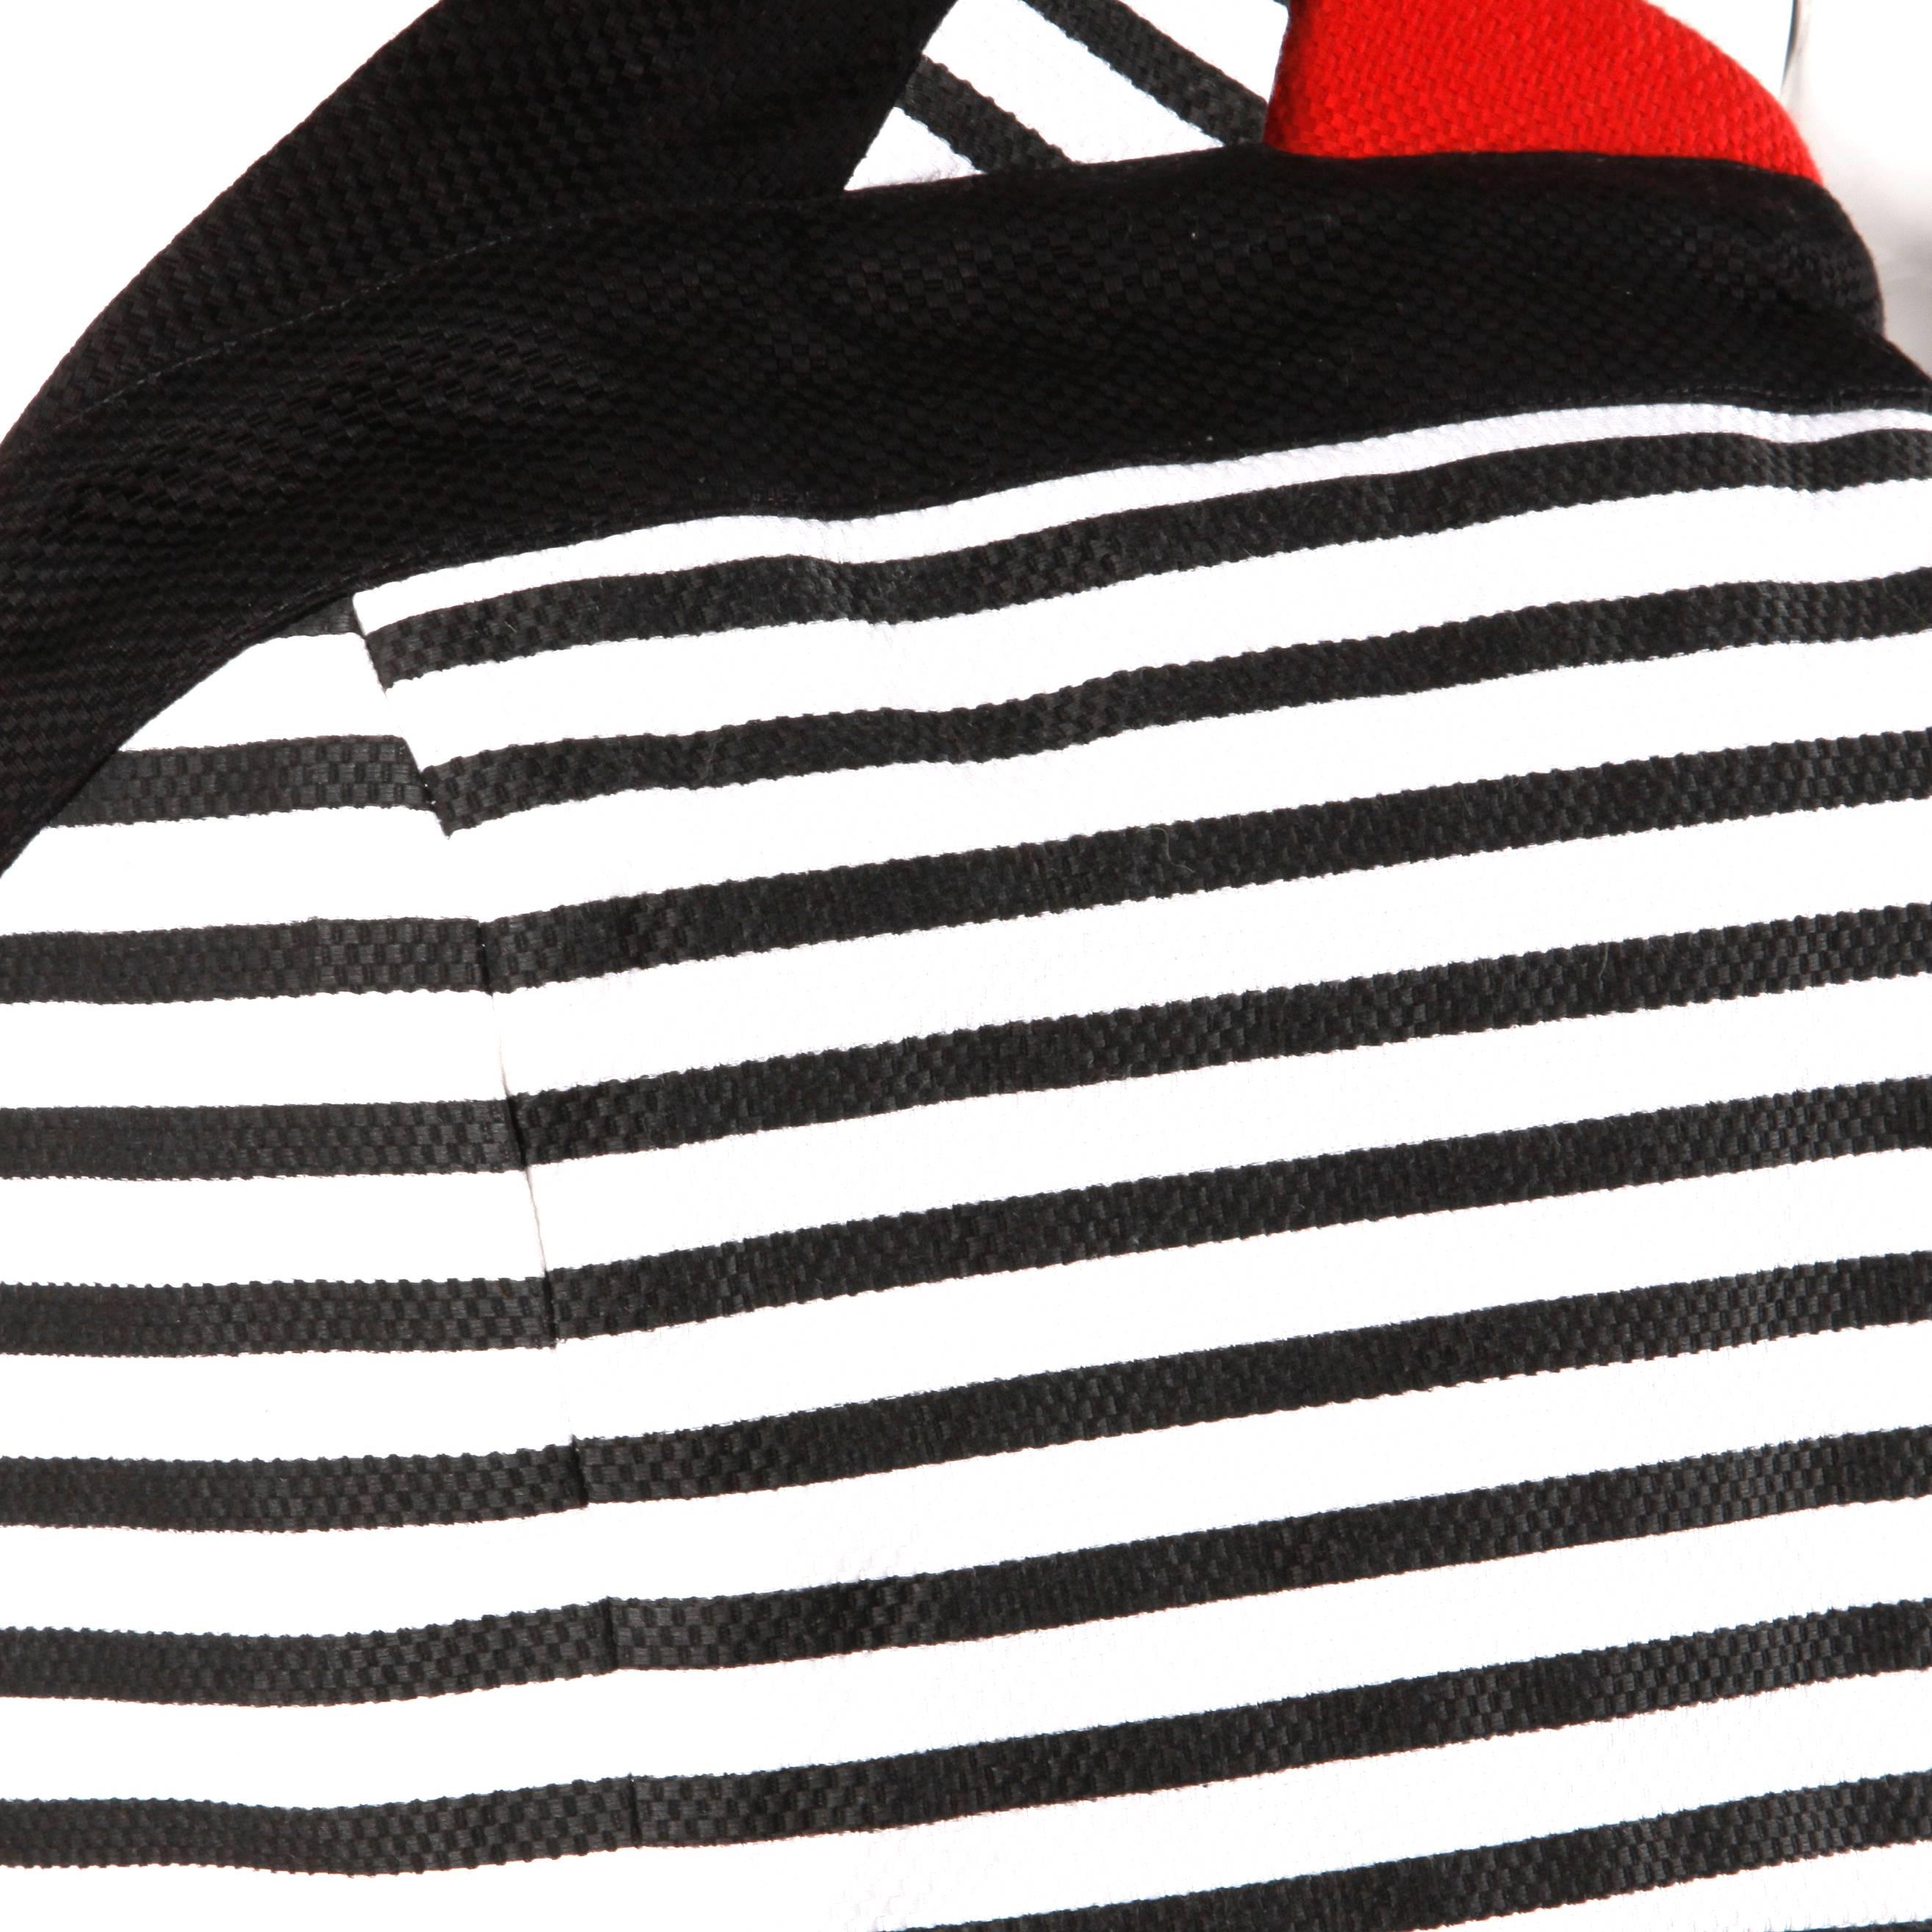 black and white striped halter top